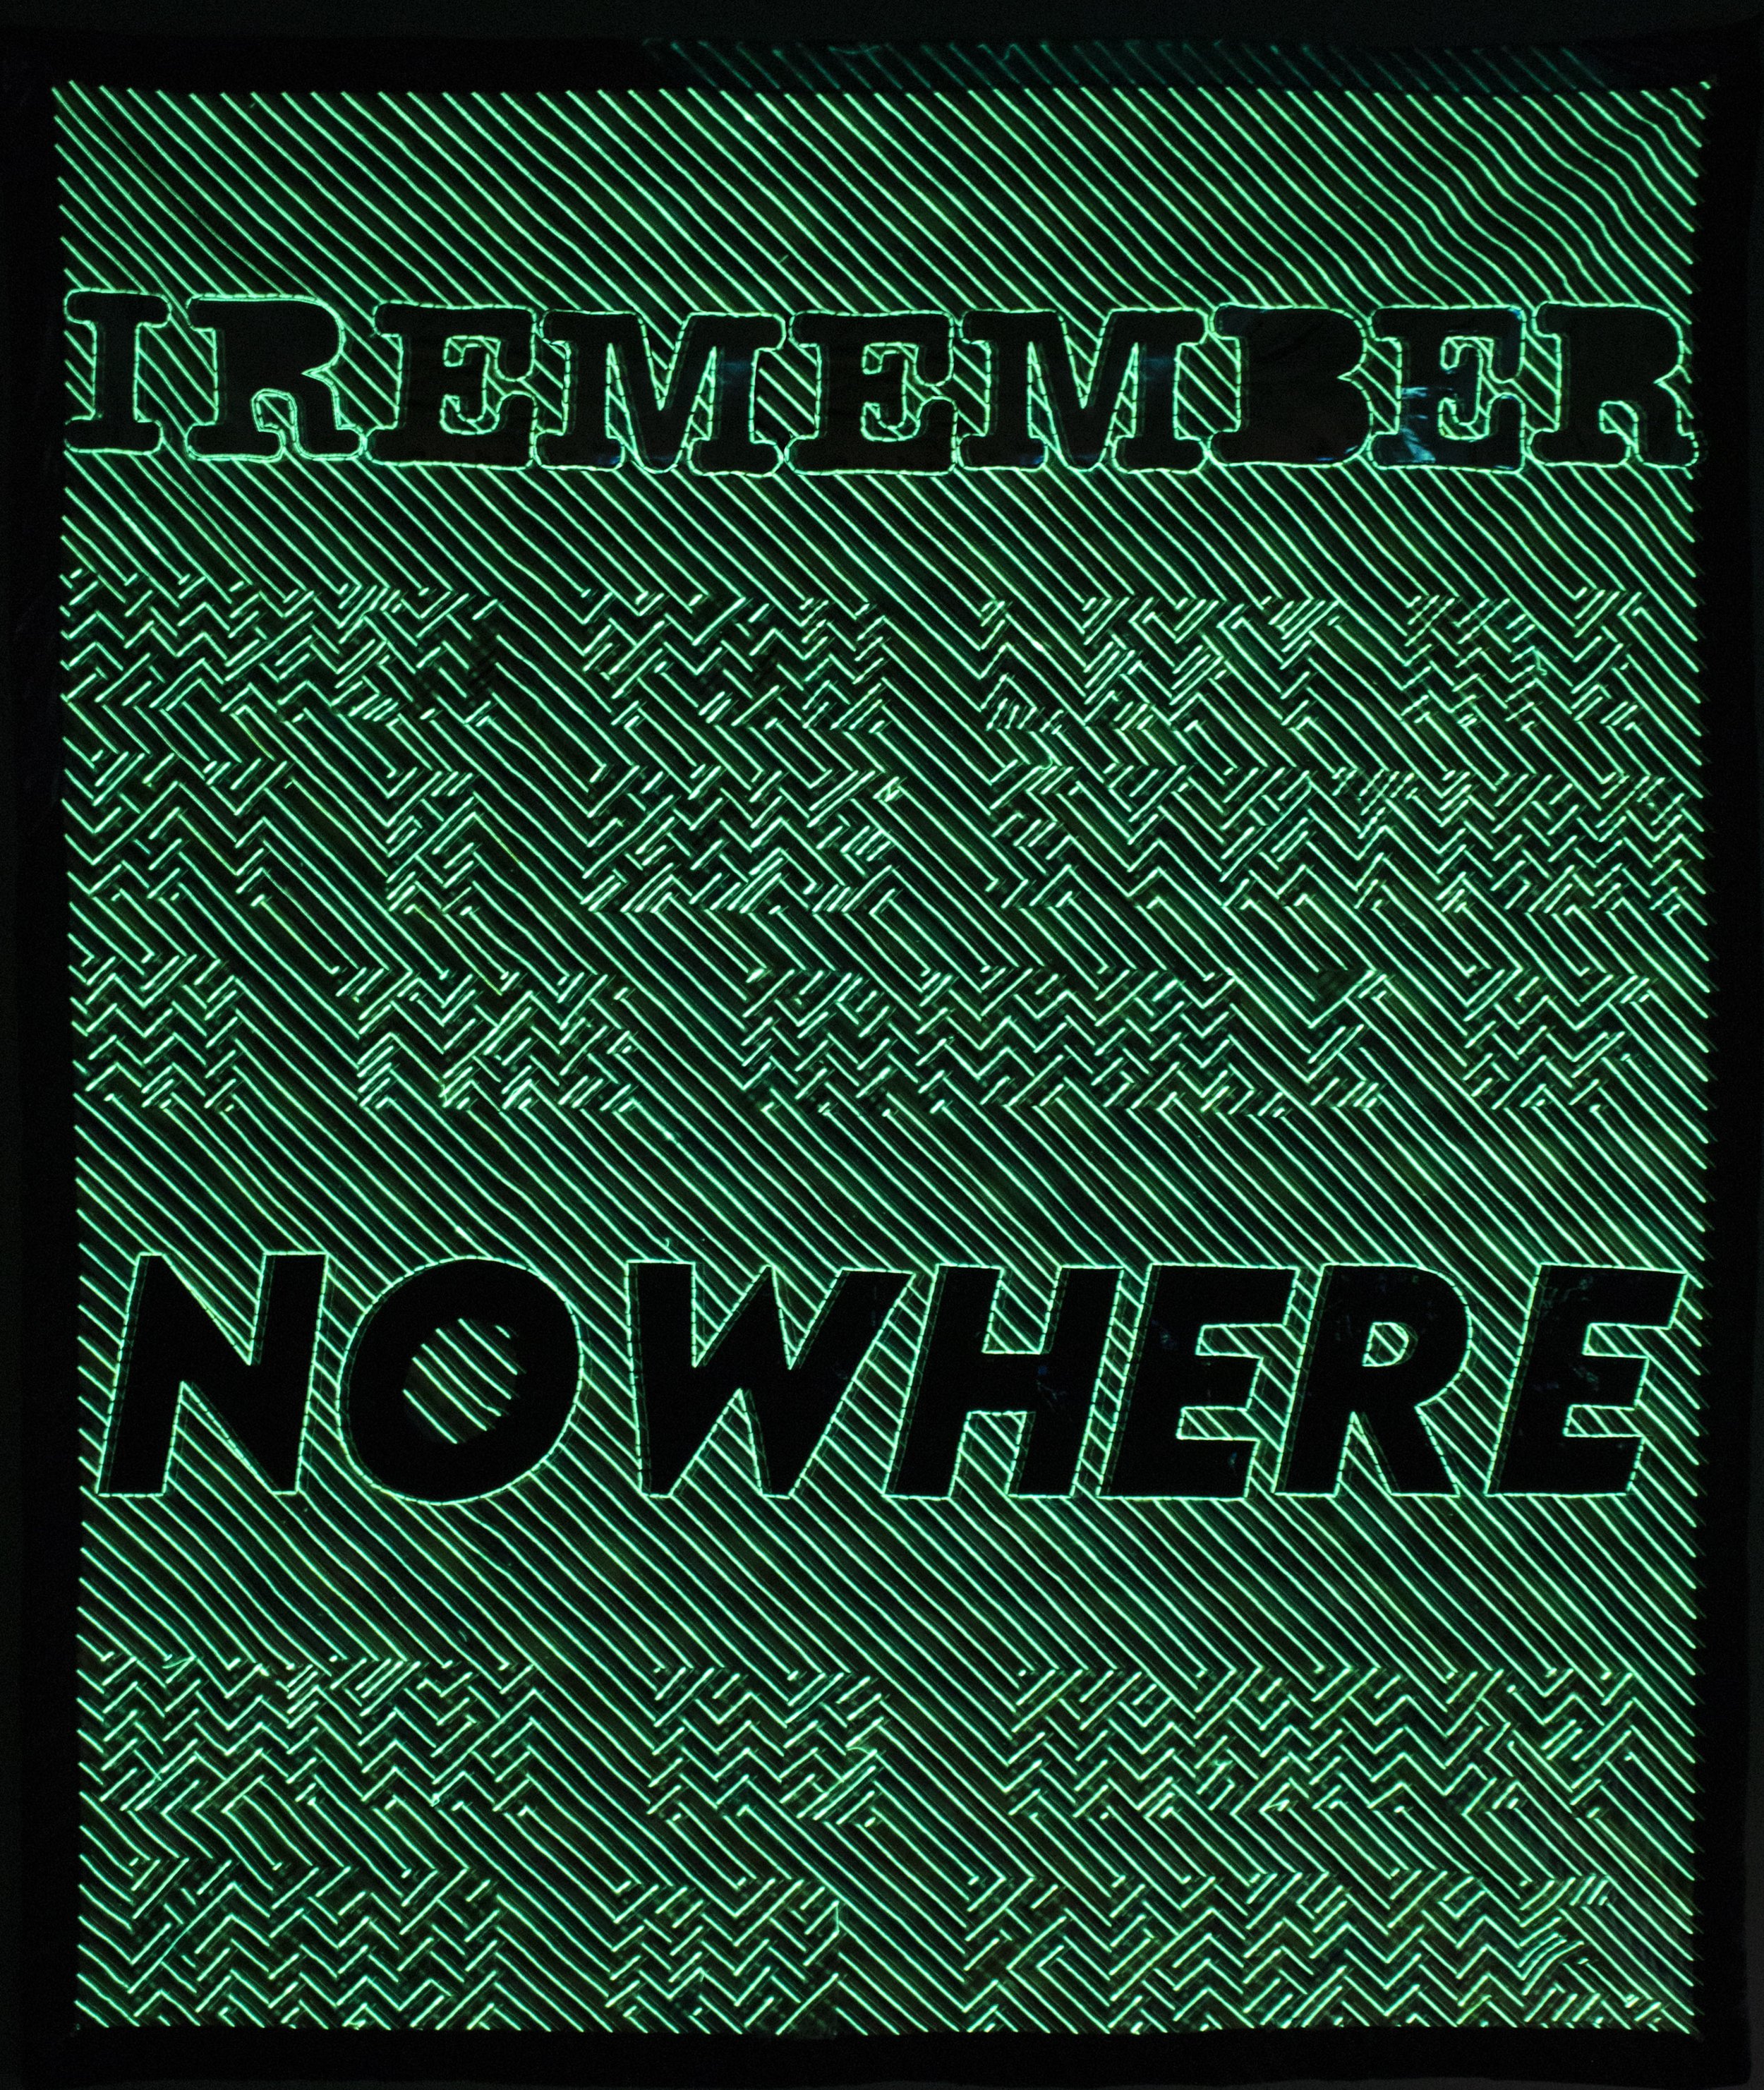 I Remember Nowhere (as seen in the dark)